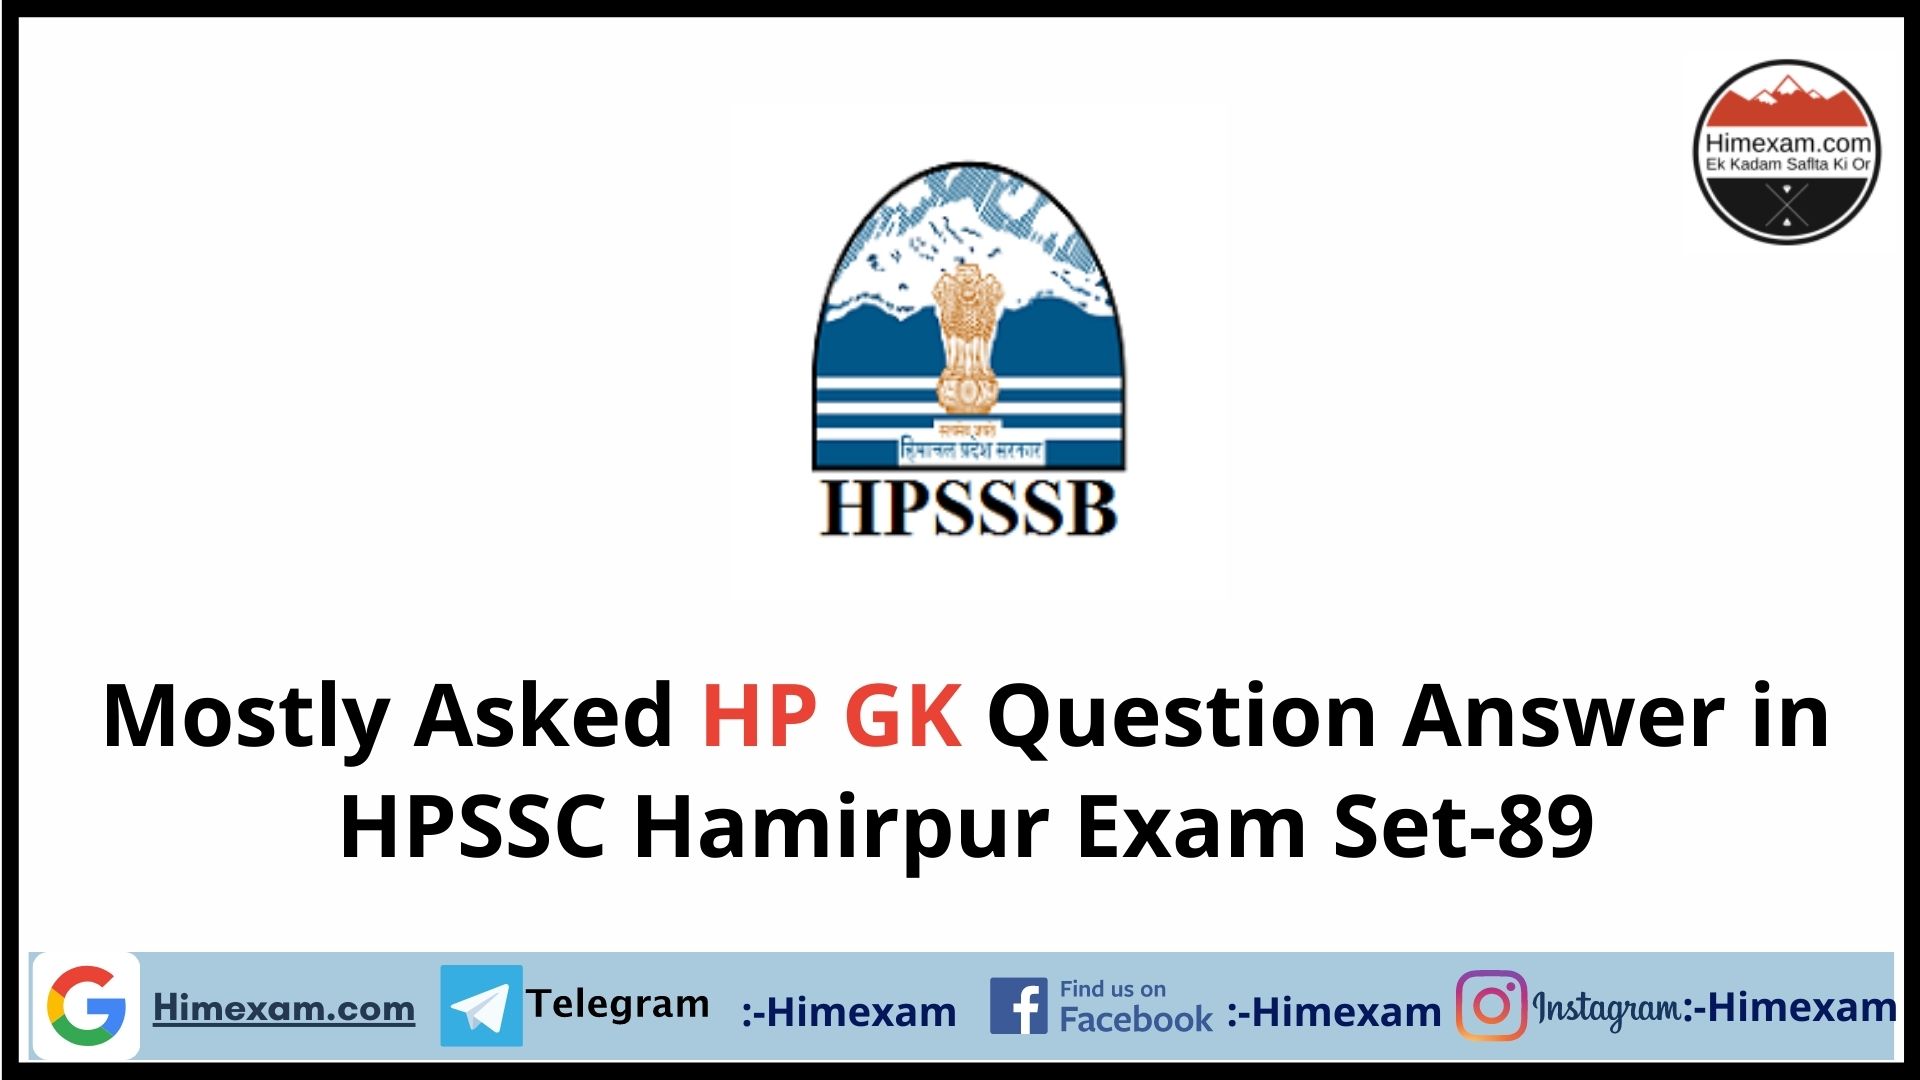 Mostly Asked HP GK Question Answer in HPSSC Hamirpur Exam Set-89